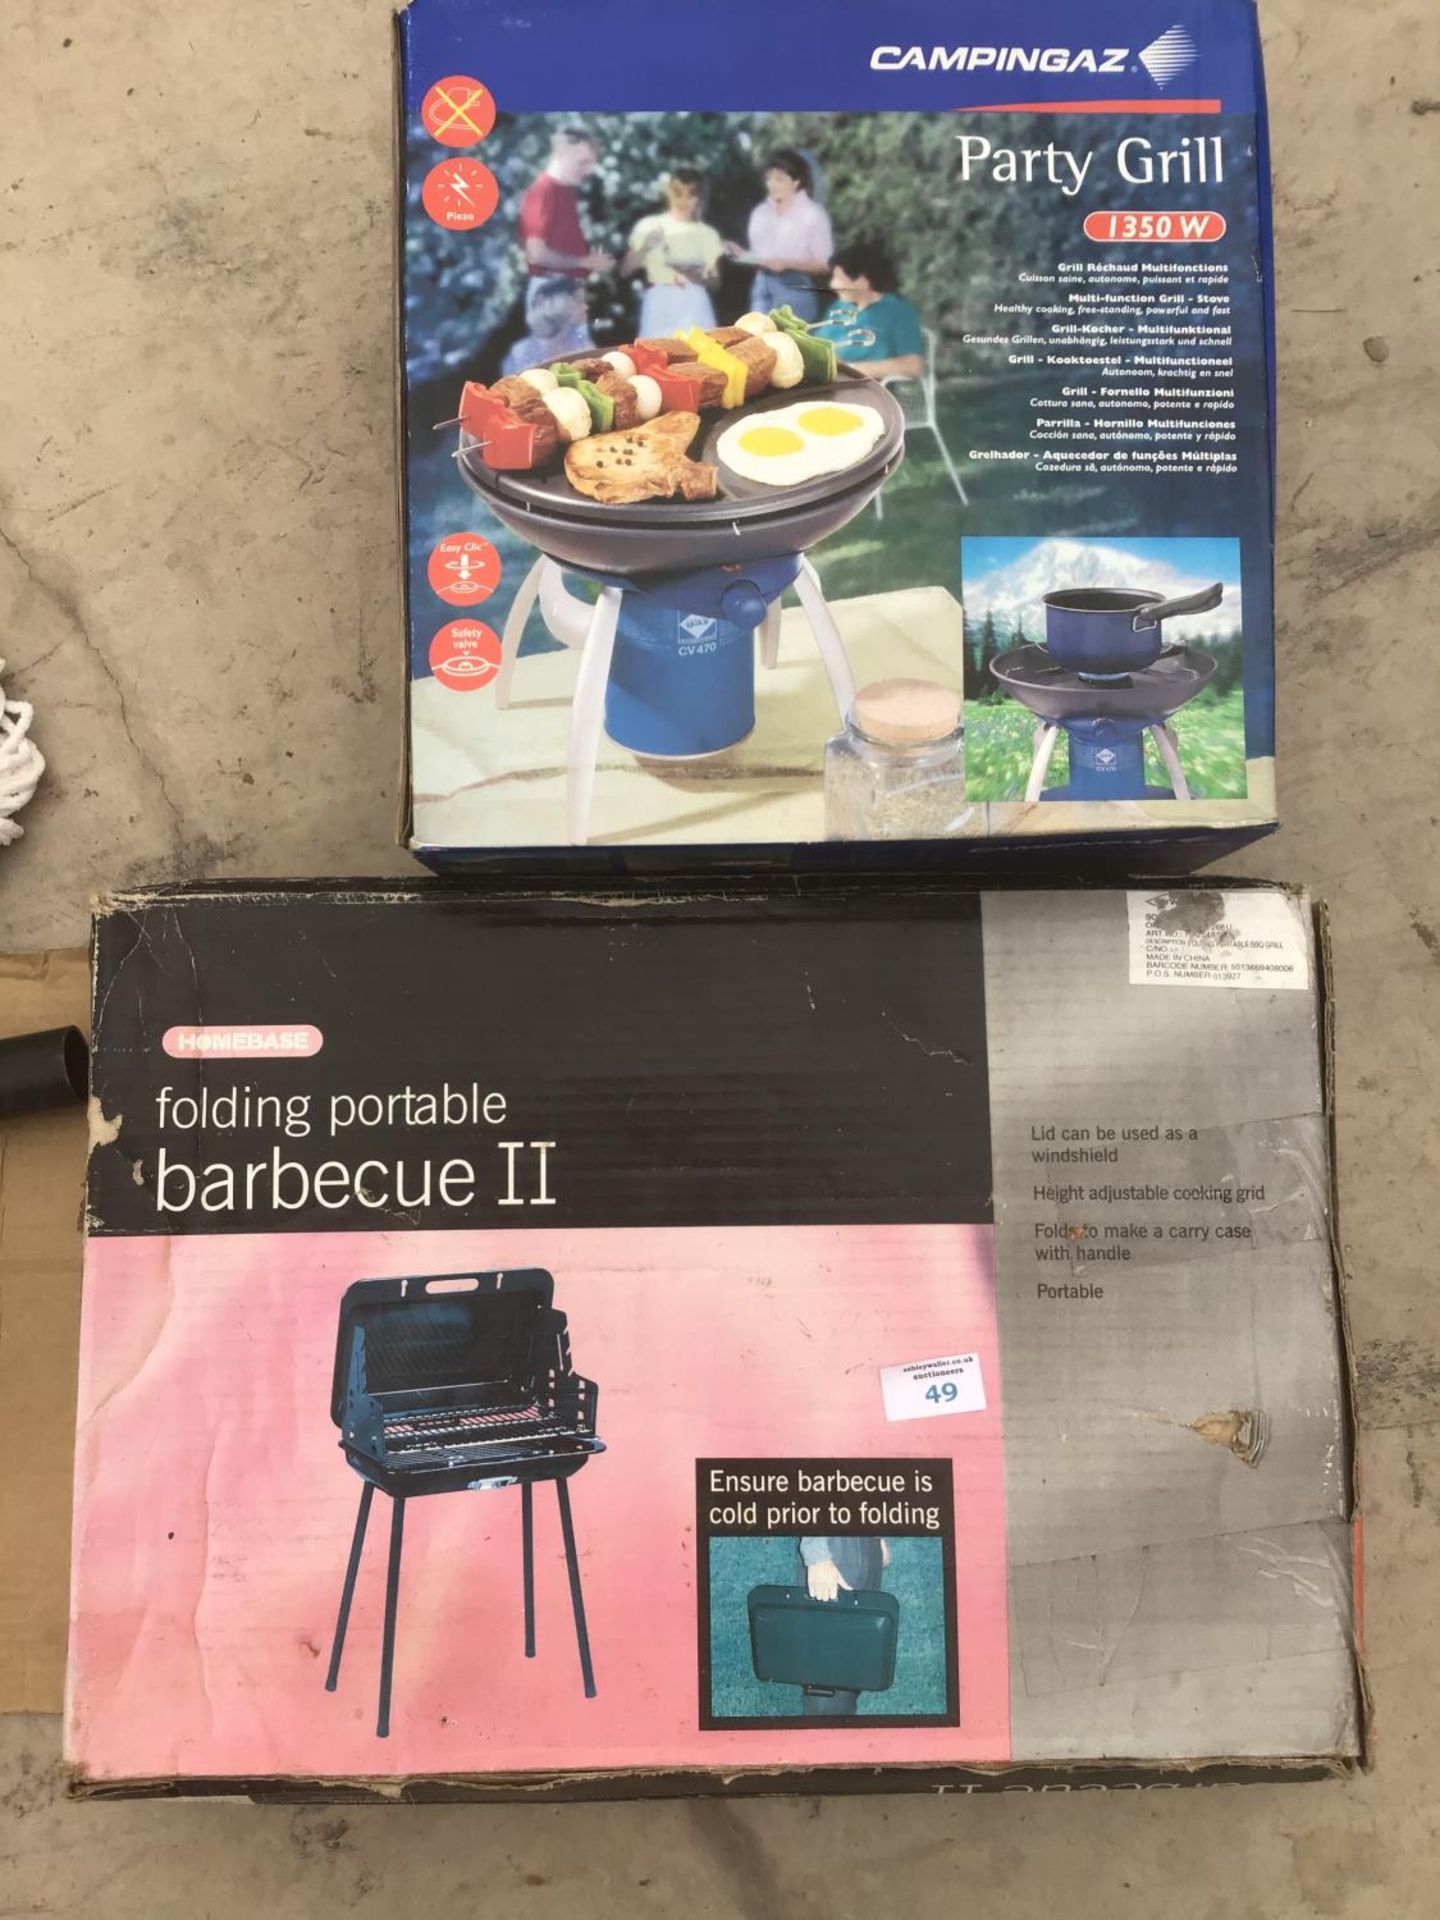 A CAMPING GAZ PARTY GRILL, FOLDING PORTABLE BBQ AND TOOLS - Image 2 of 2